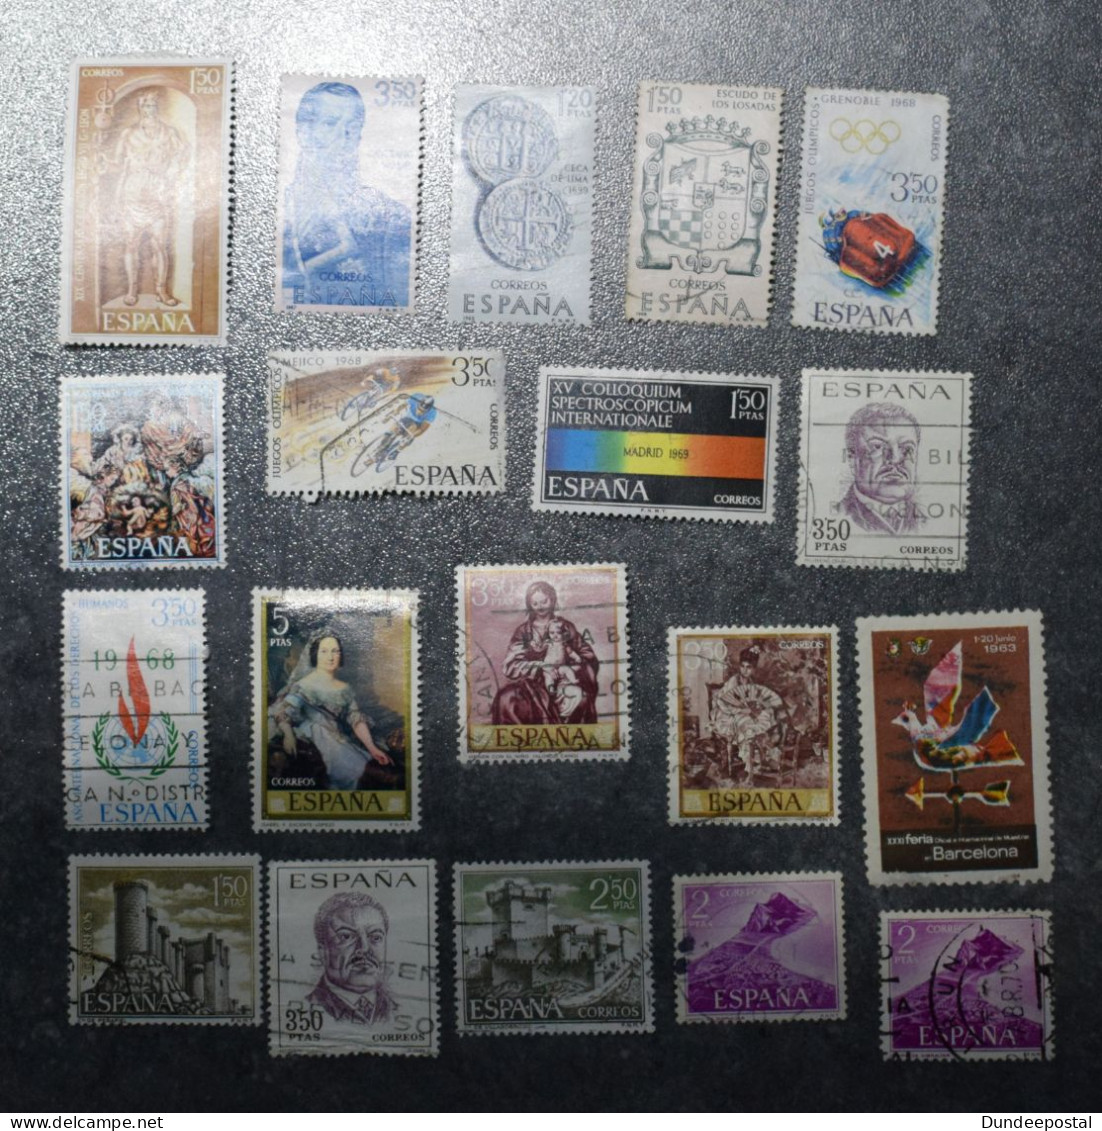 SPAIN  STAMPS Coms 1967 - 69 ~~L@@K~~ - Used Stamps